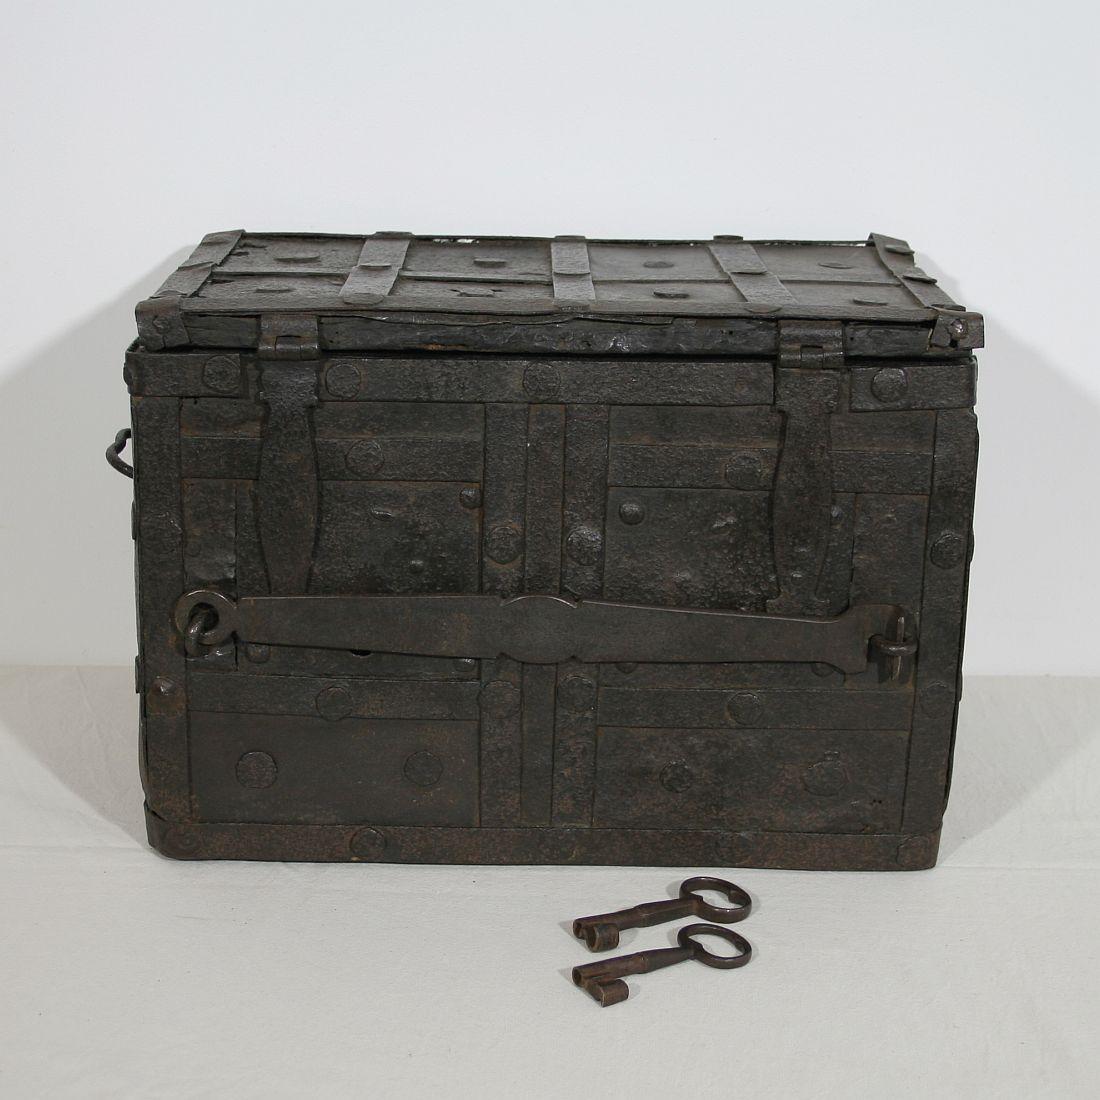 Beautiful and rare strongbox from Spain with a very great size. Made out of wrought iron on wood with two working locks. In front of these locks there is an extra wrought iron cover placed that could also be locked with a padlock. This piece shall